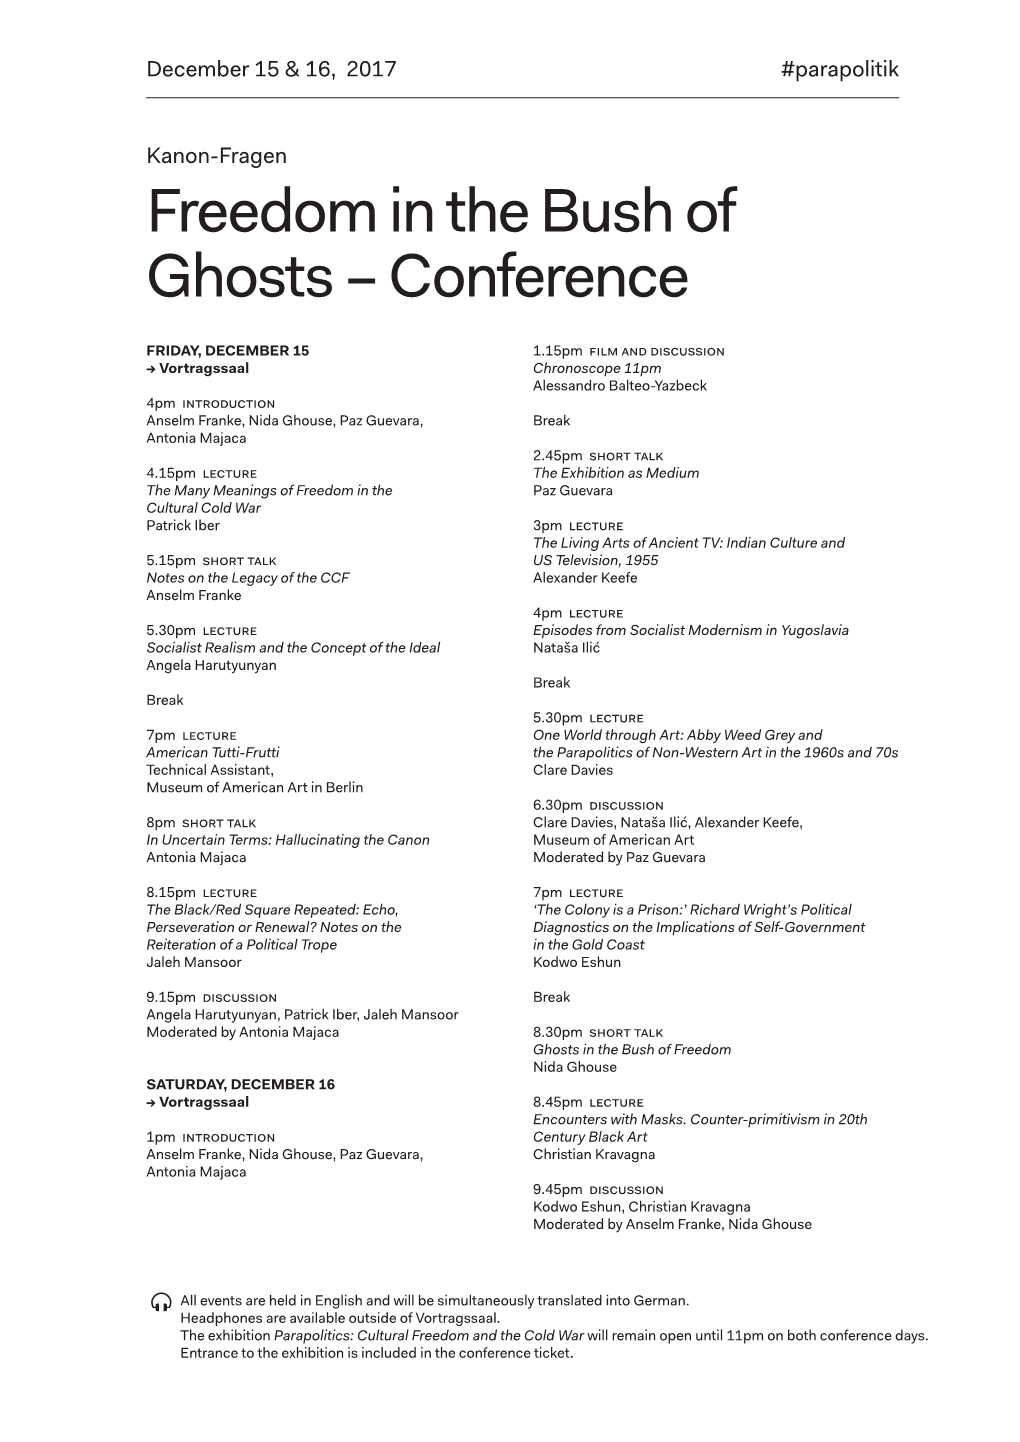 Freedom in the Bush of Ghosts – Conference